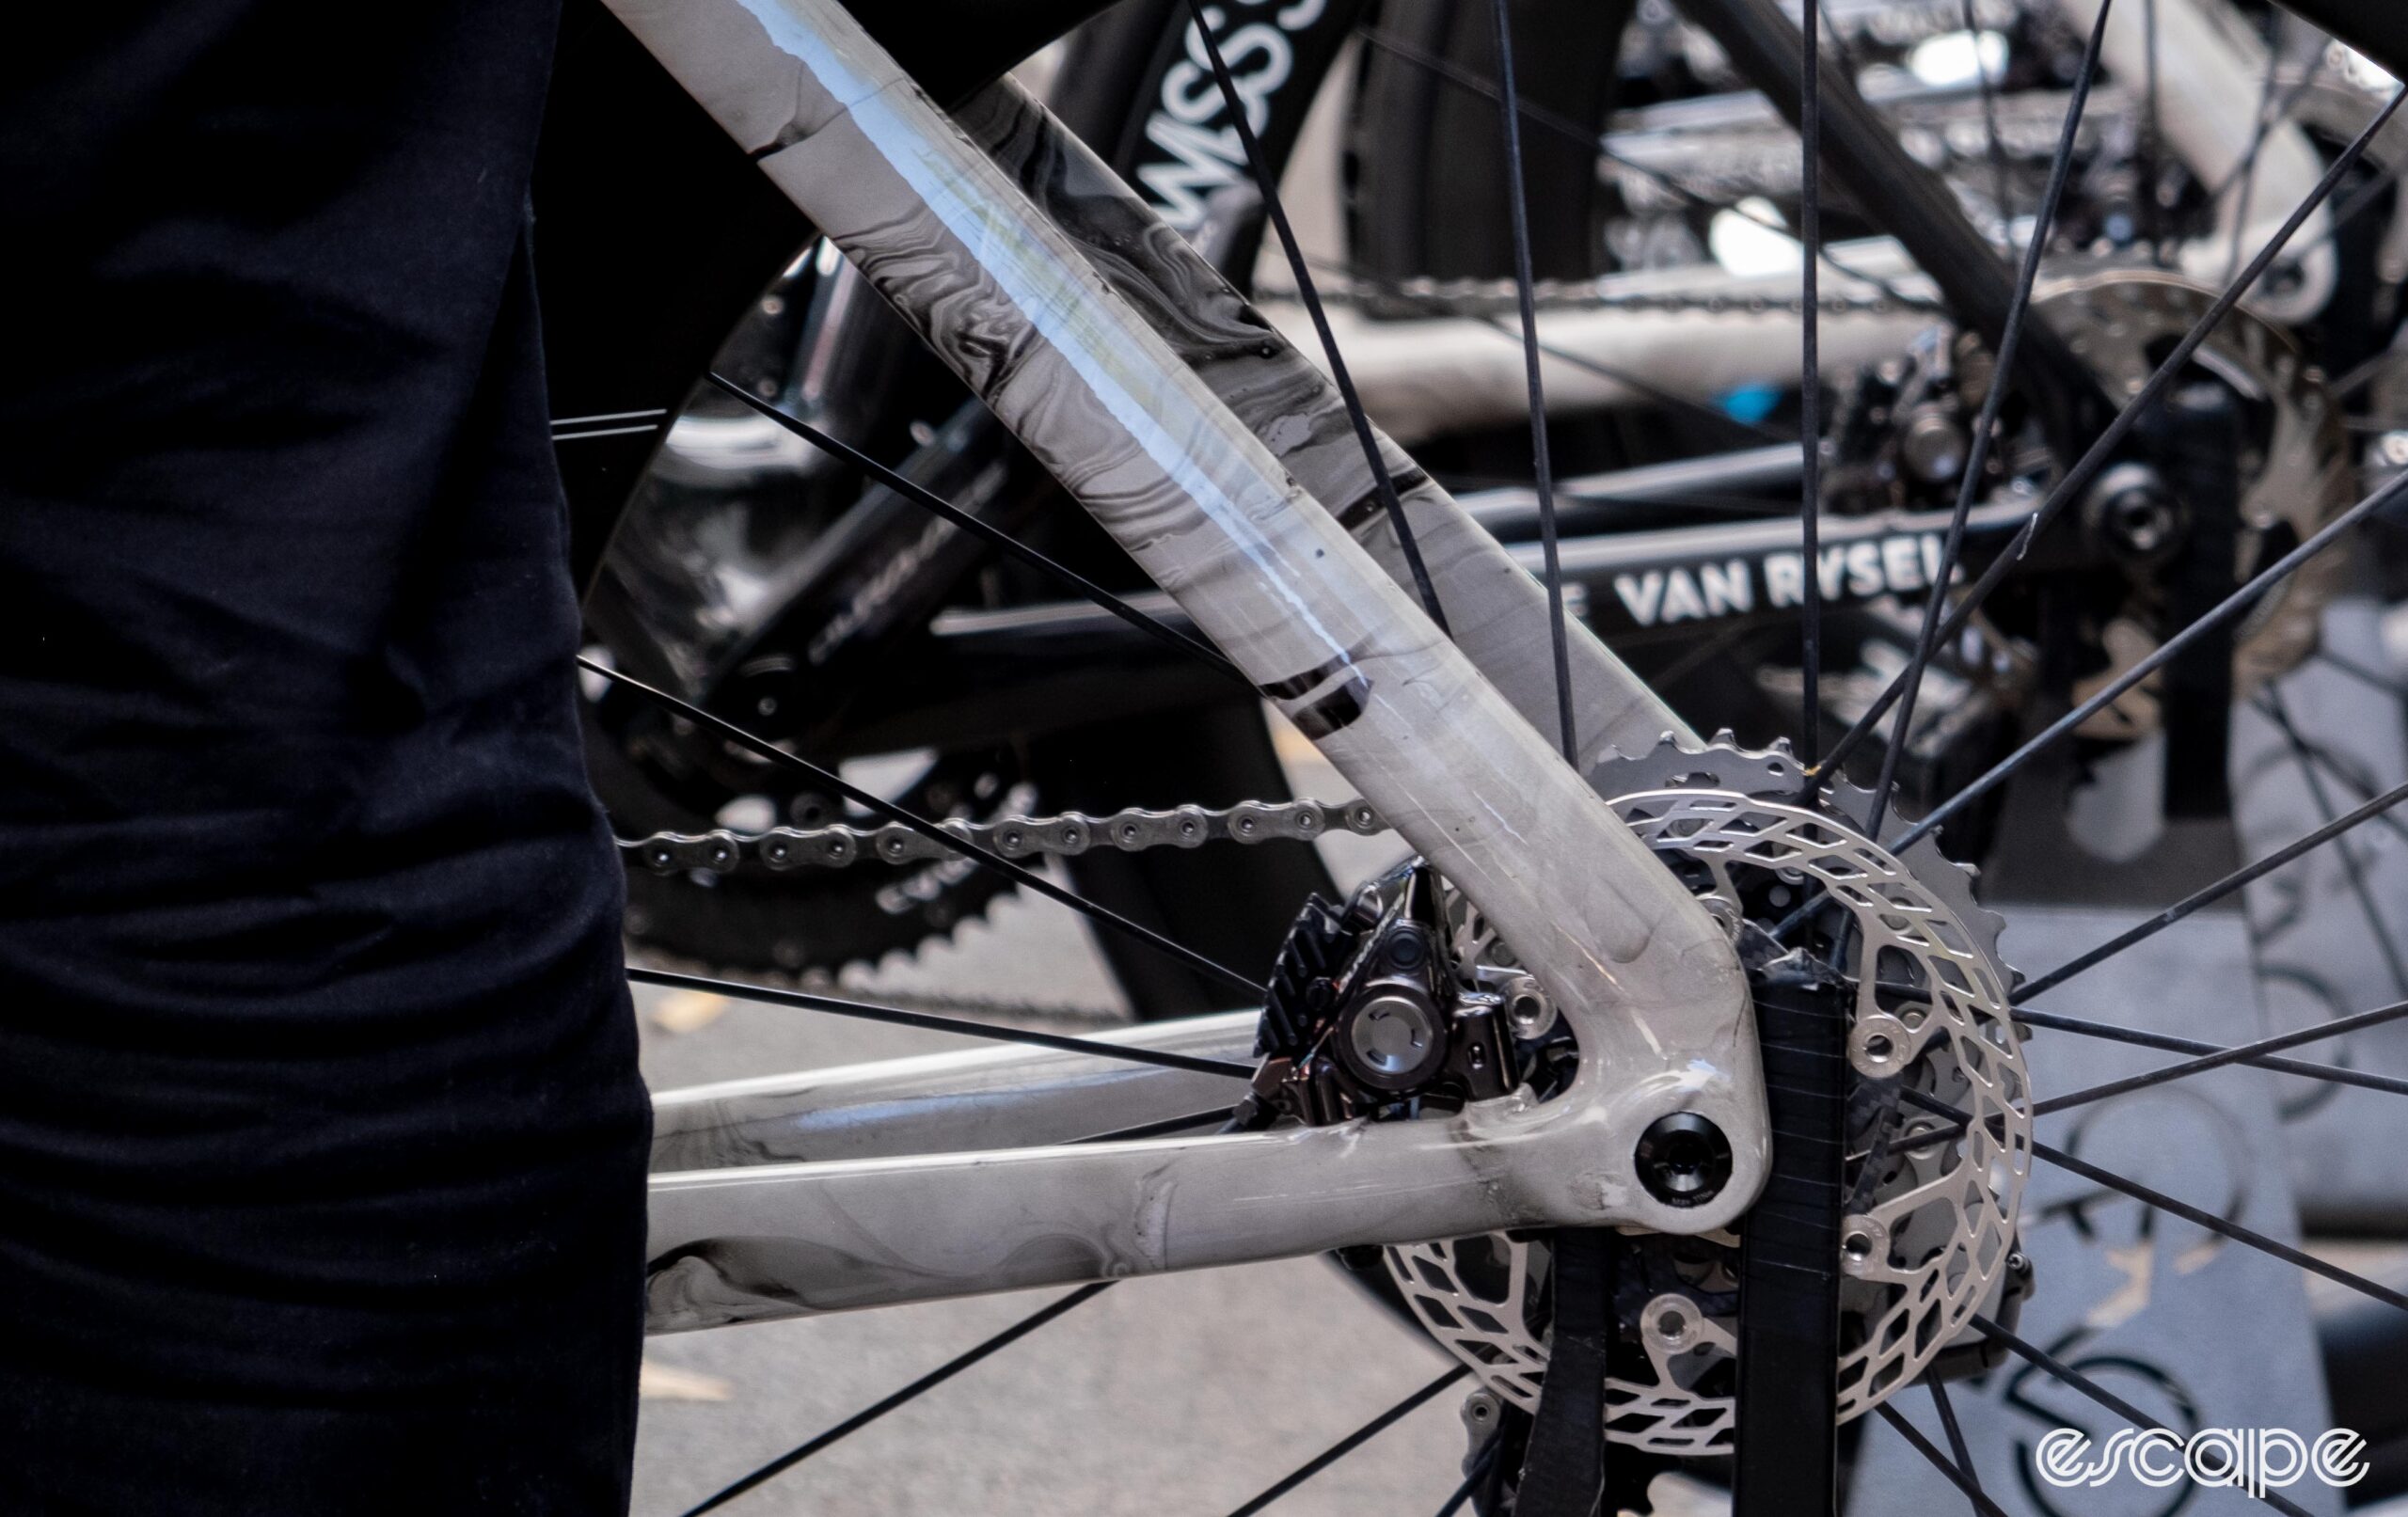 The photo shows Van Rysel's new FCR Pro aero bike rear drop out and seat stays